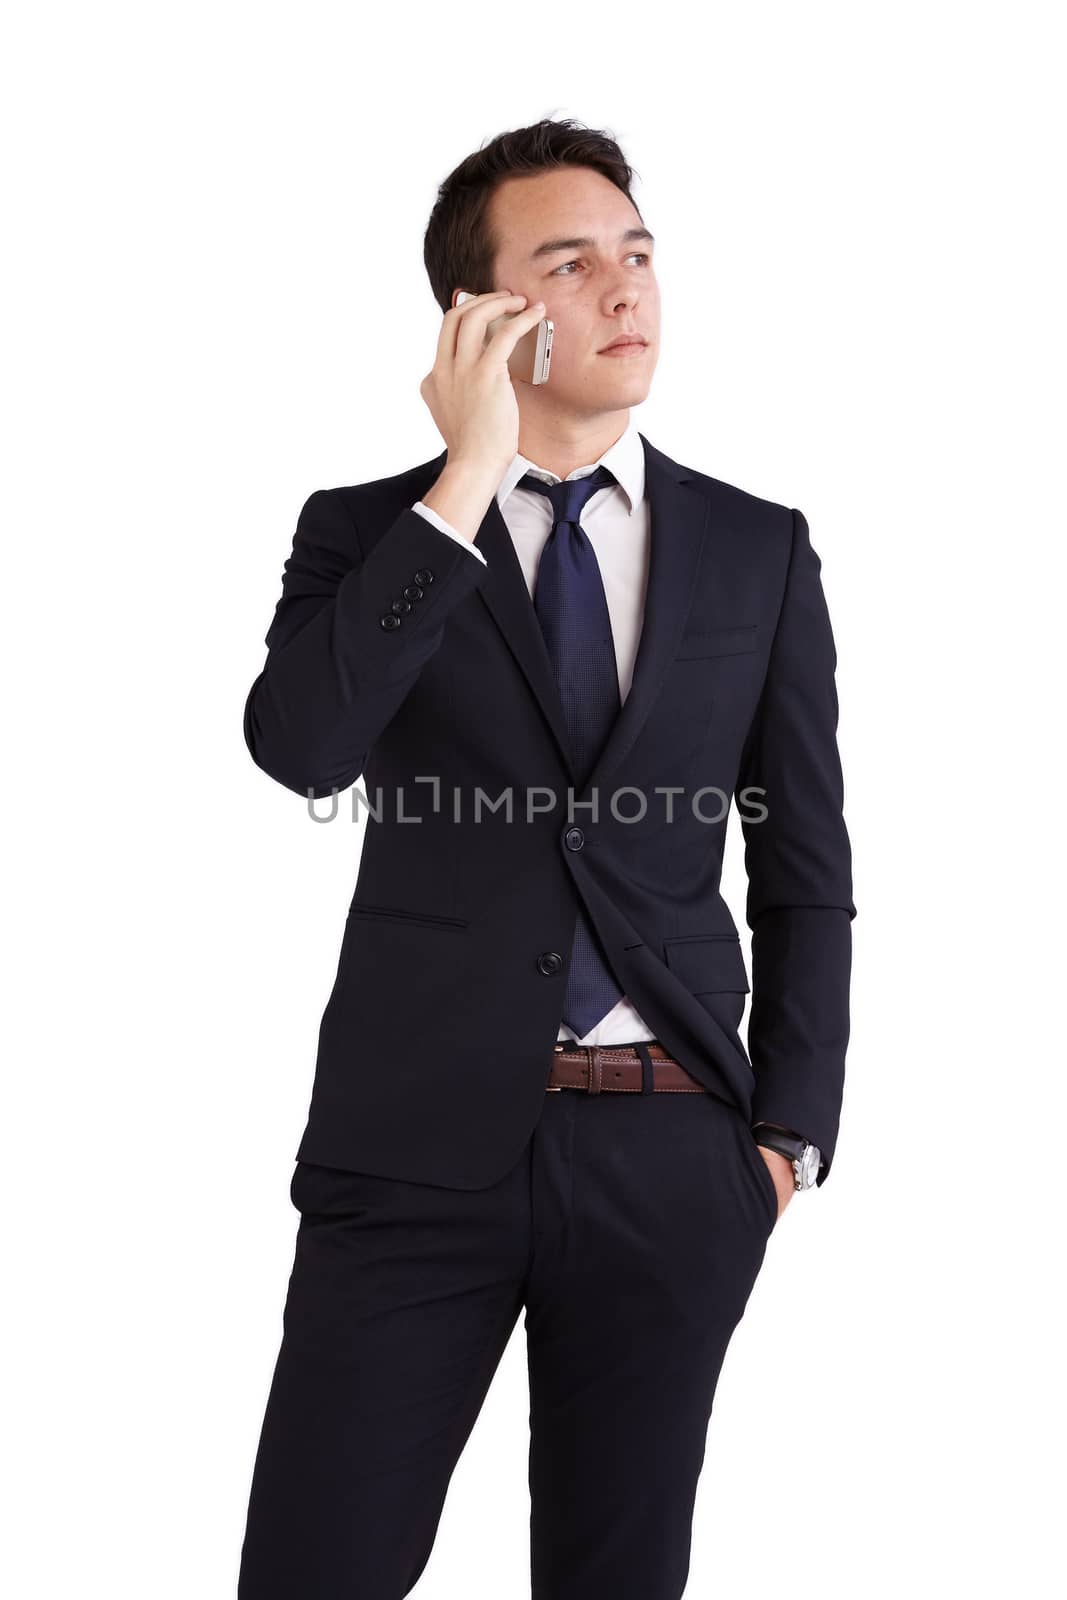 A young caucasian male businessman looking thoughtful holding a mobile phone looking away from camera.